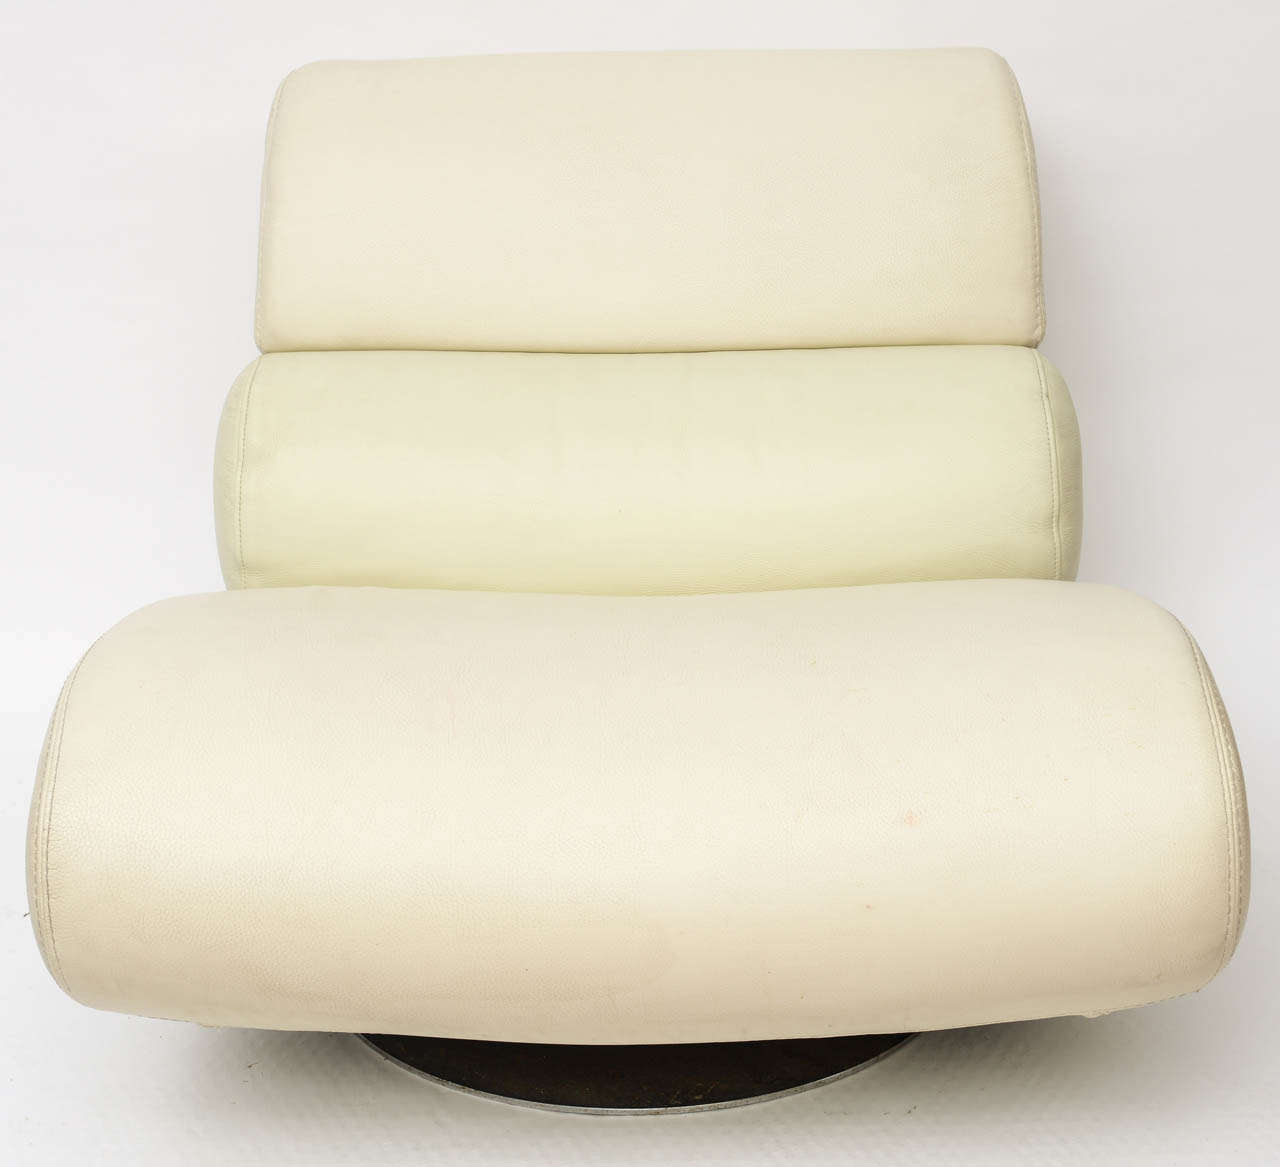 Lounge seat by Roche Bobois in luxurious leather.